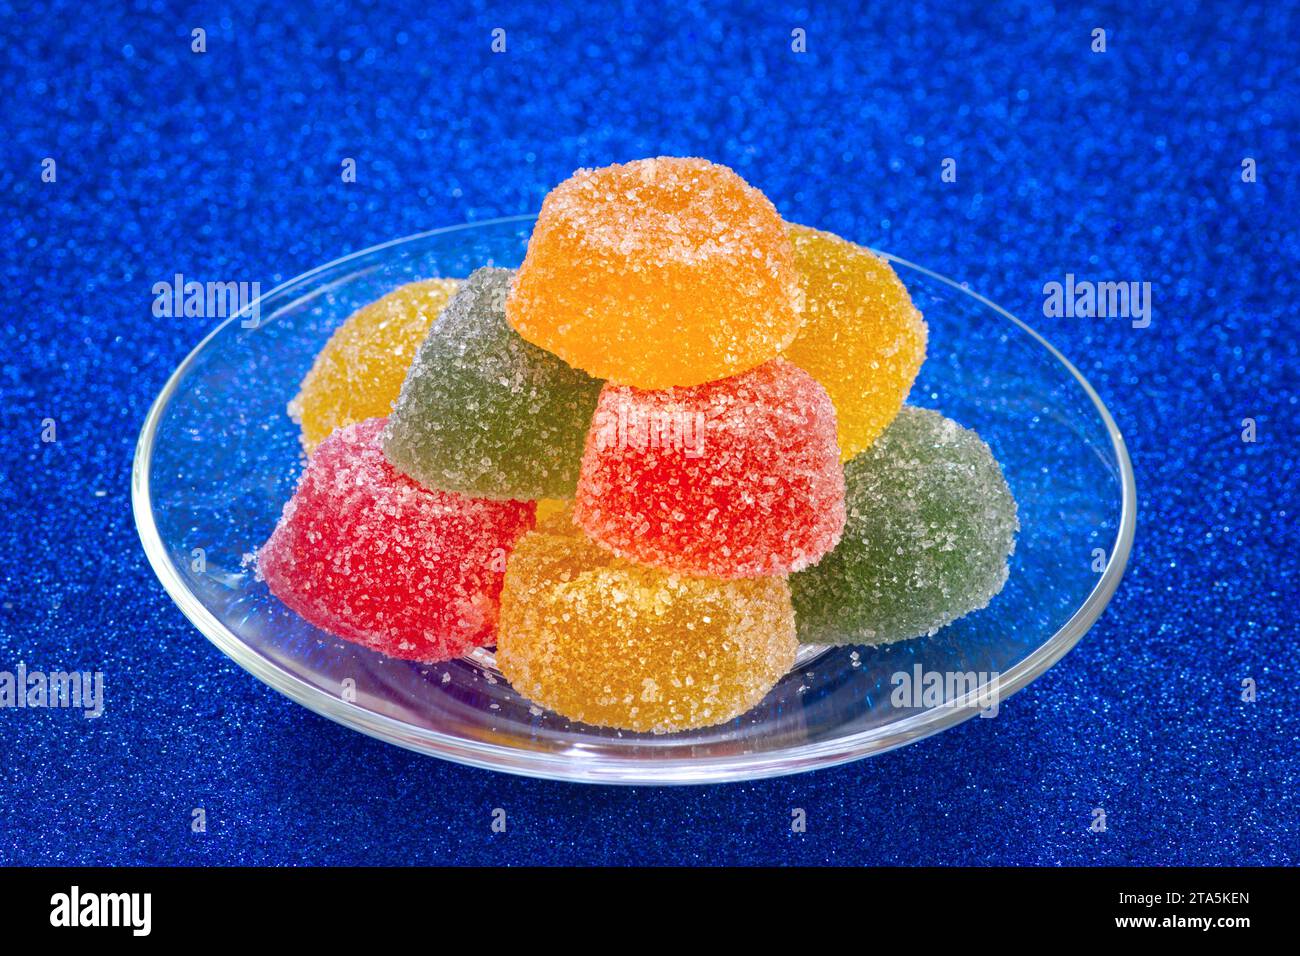 Fruit Marmalade With Sugar Coating. Colorful Jelly Candy On Glass Plate. Yummy Dessert Confectionery. Stock Photo